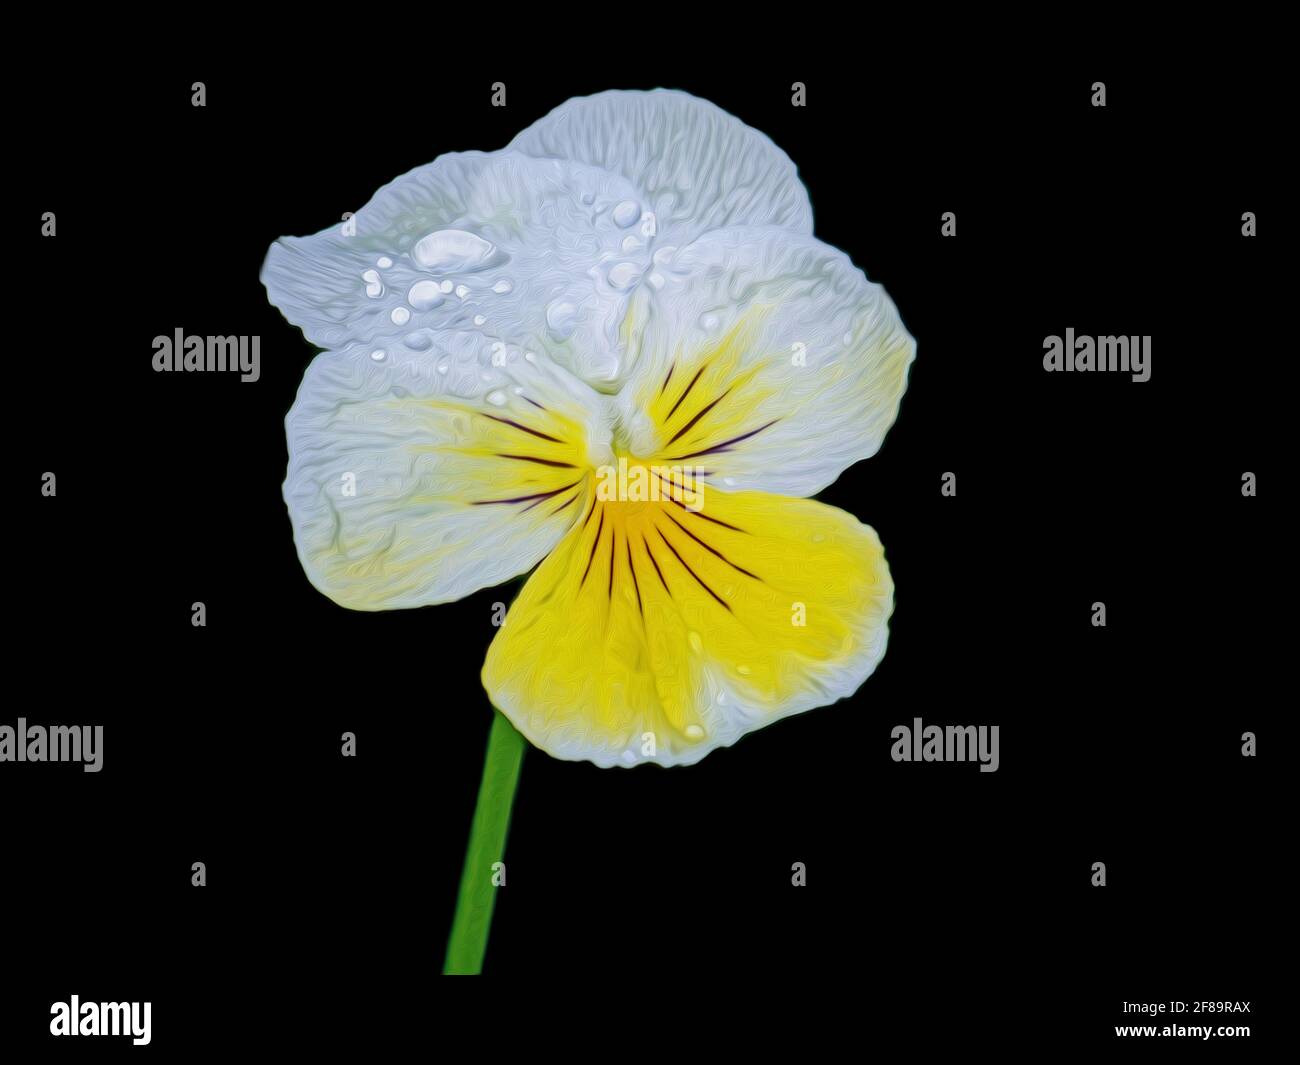 Violet (Viola) wet flower with white and yellow petals on a black background, artistic edited pattern Stock Photo